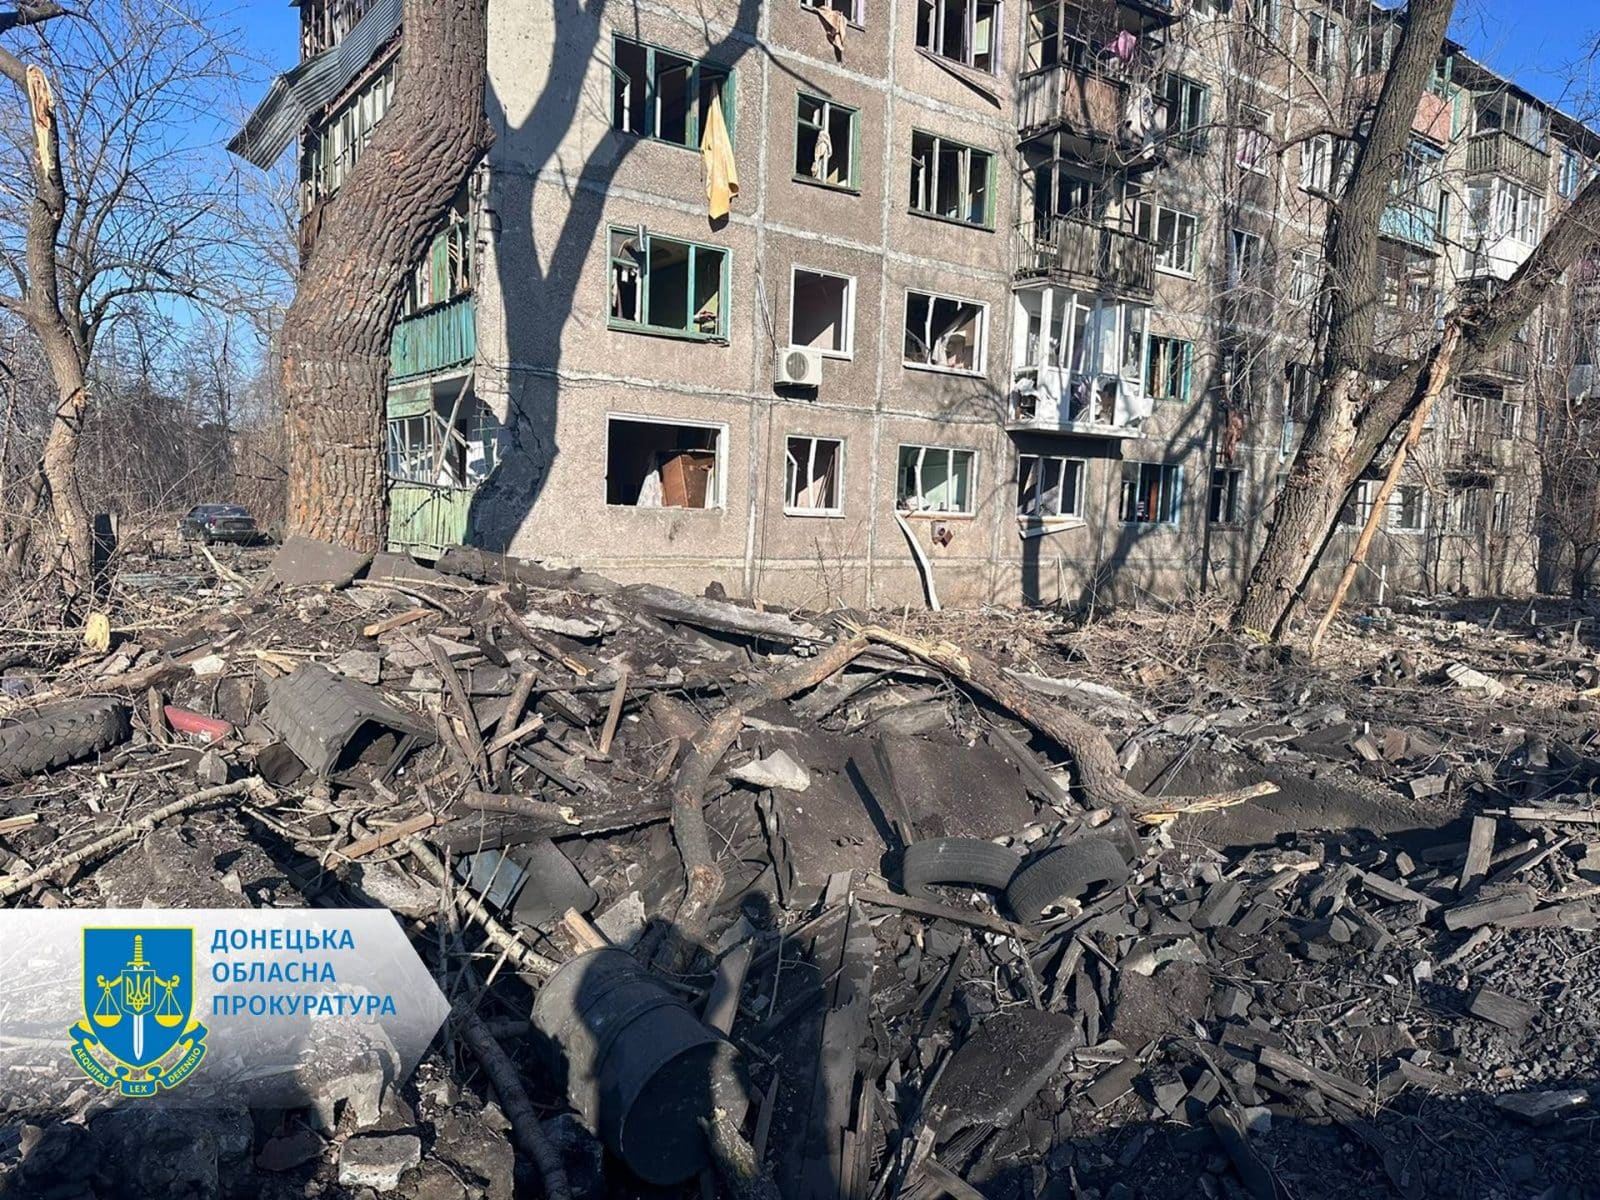 Russian troops fired at Bakhmut in the Donetsk region killing 1 civilian and injured 4: photos